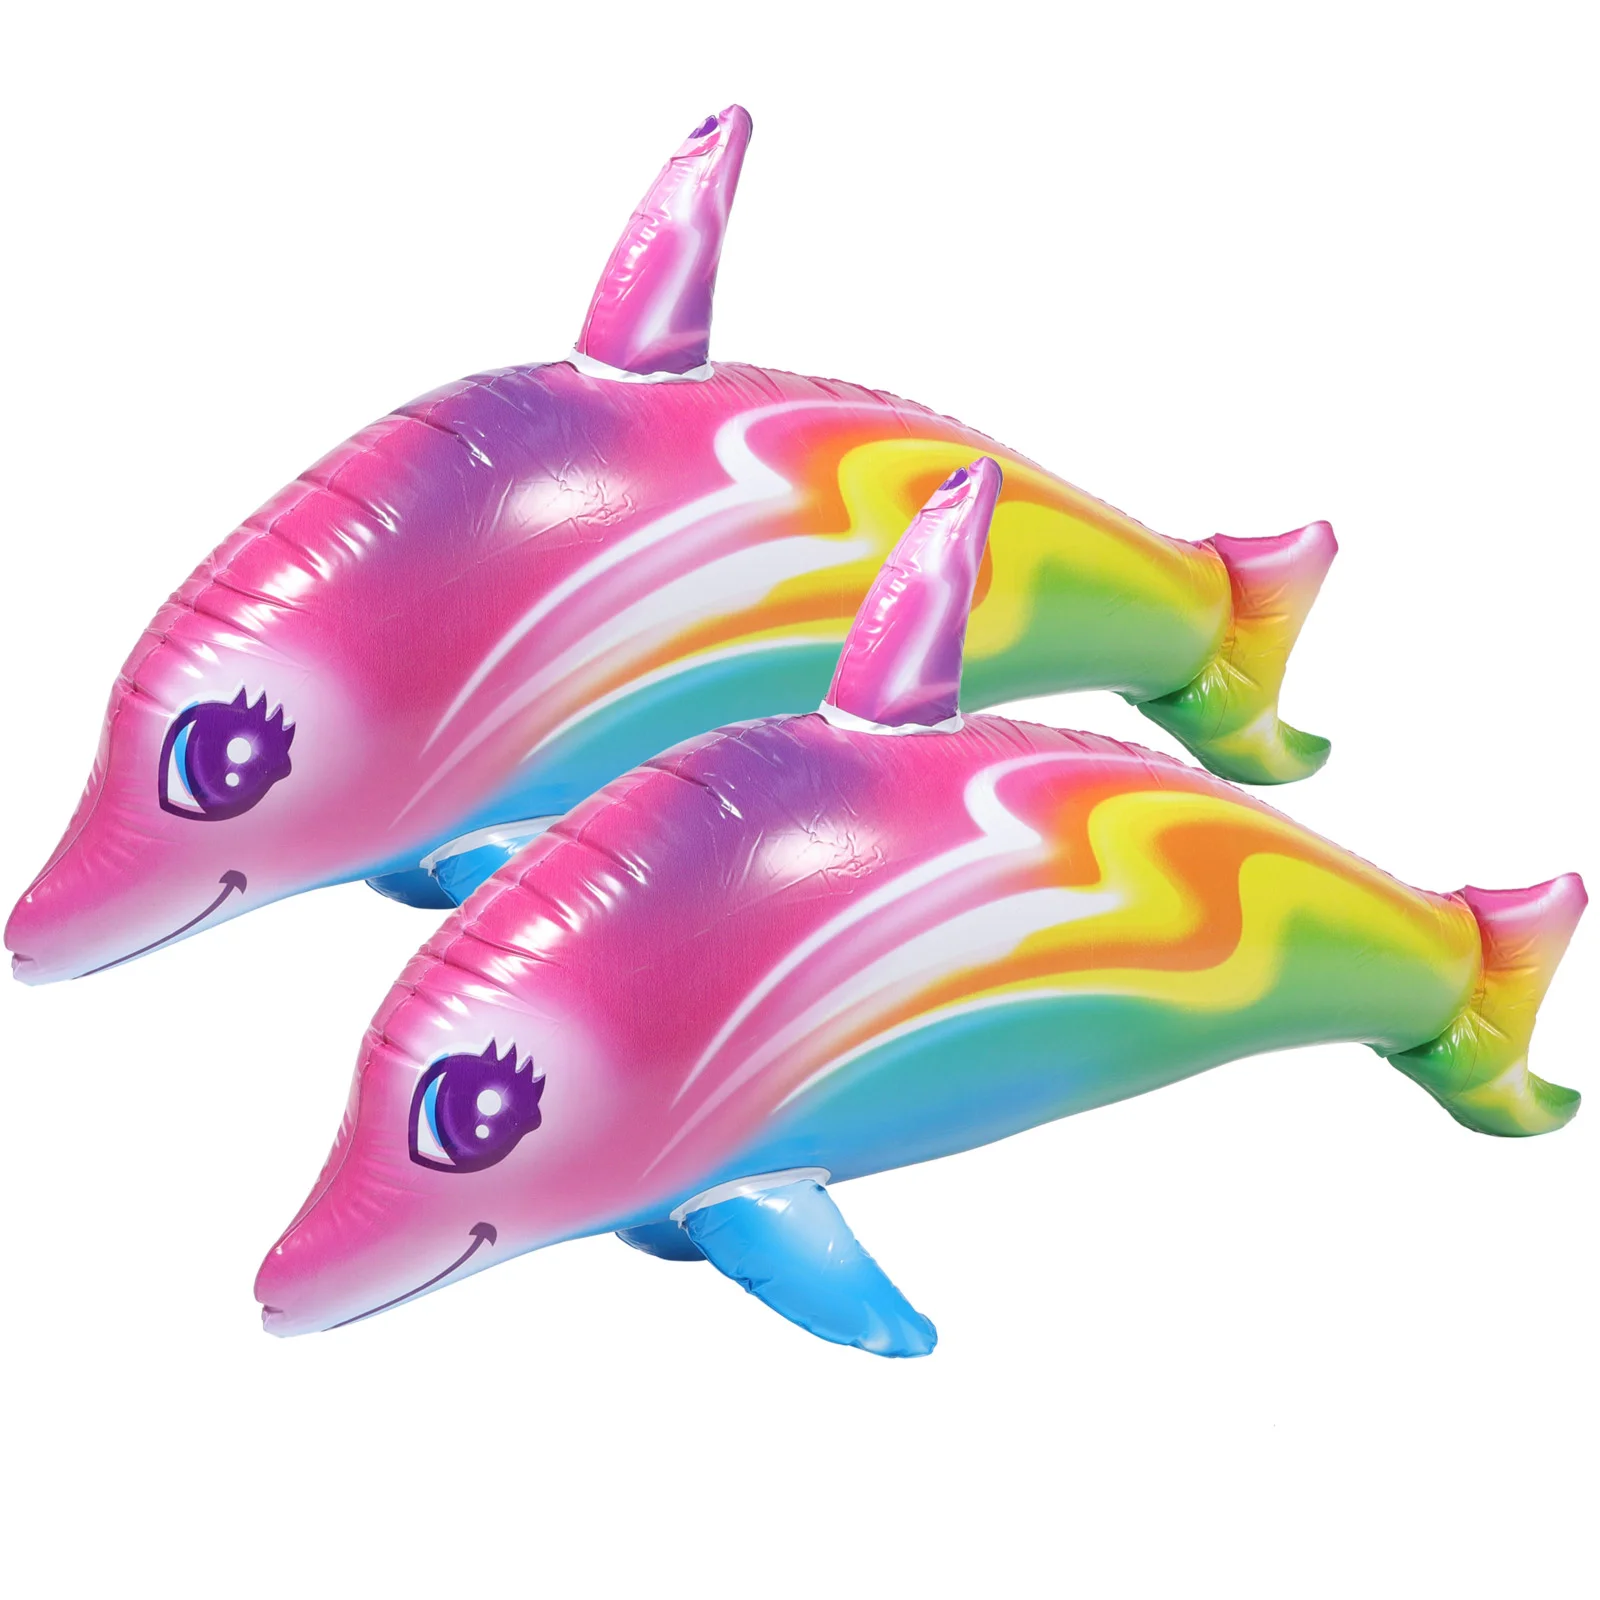 2 Pcs Inflatable Dolphin Toy Beach Game Mermaid Gifts Pool Party Favors ... - $15.93